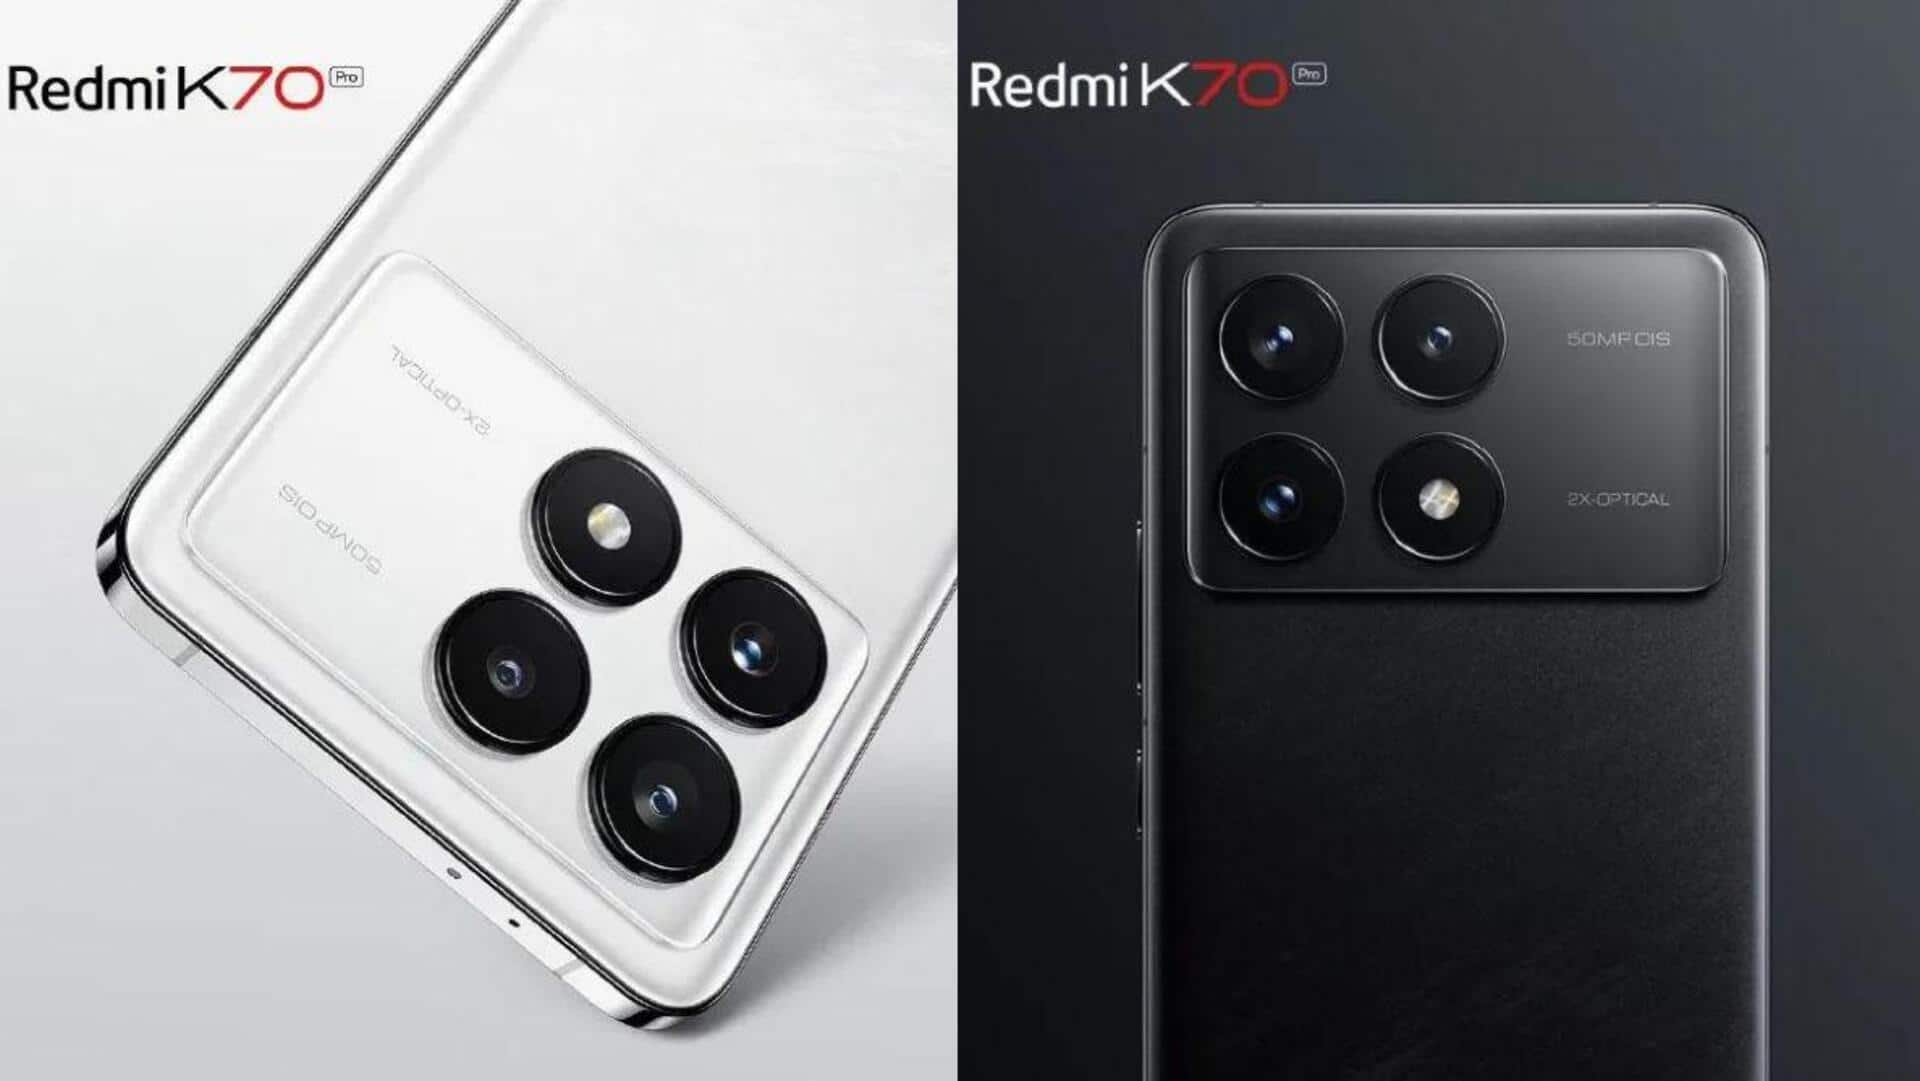 Leaks reveal camera specifications of Redmi K70 series